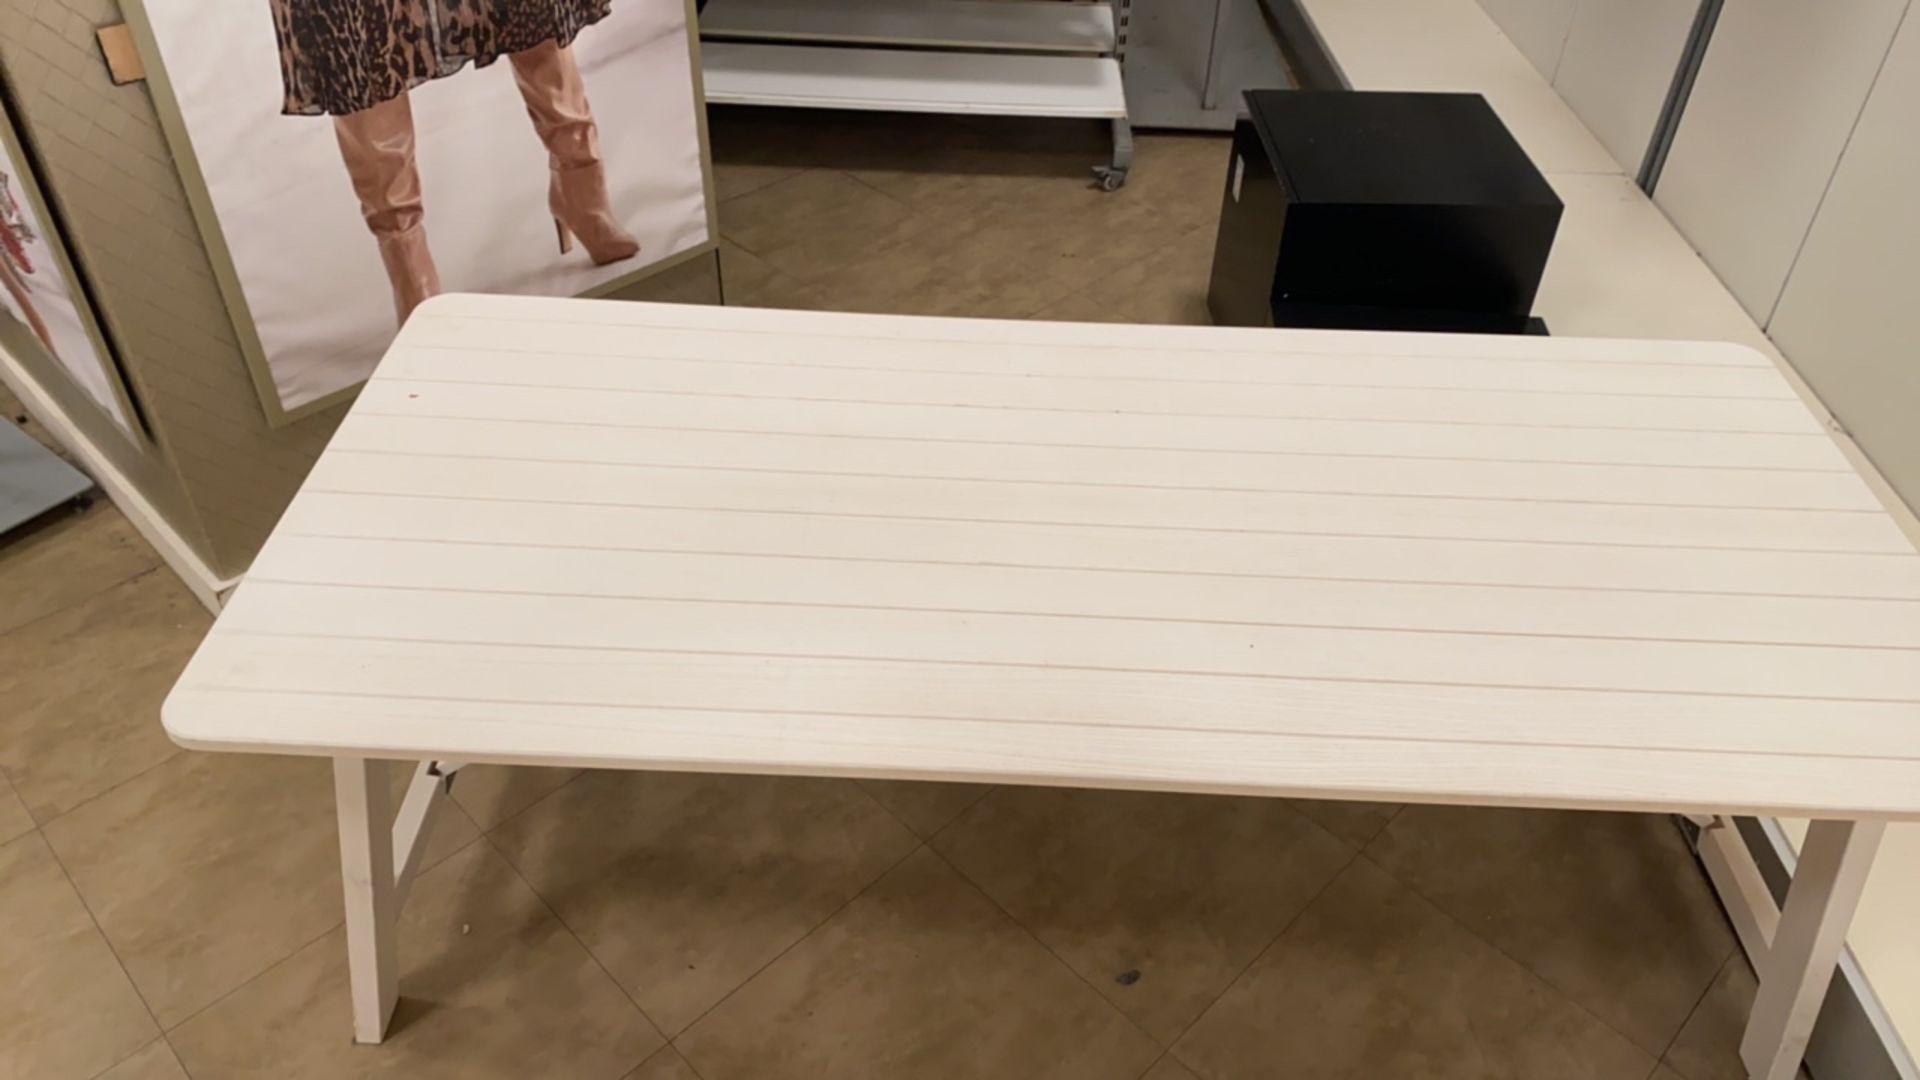 Large Foldable Wooden Effect Table - Image 2 of 6